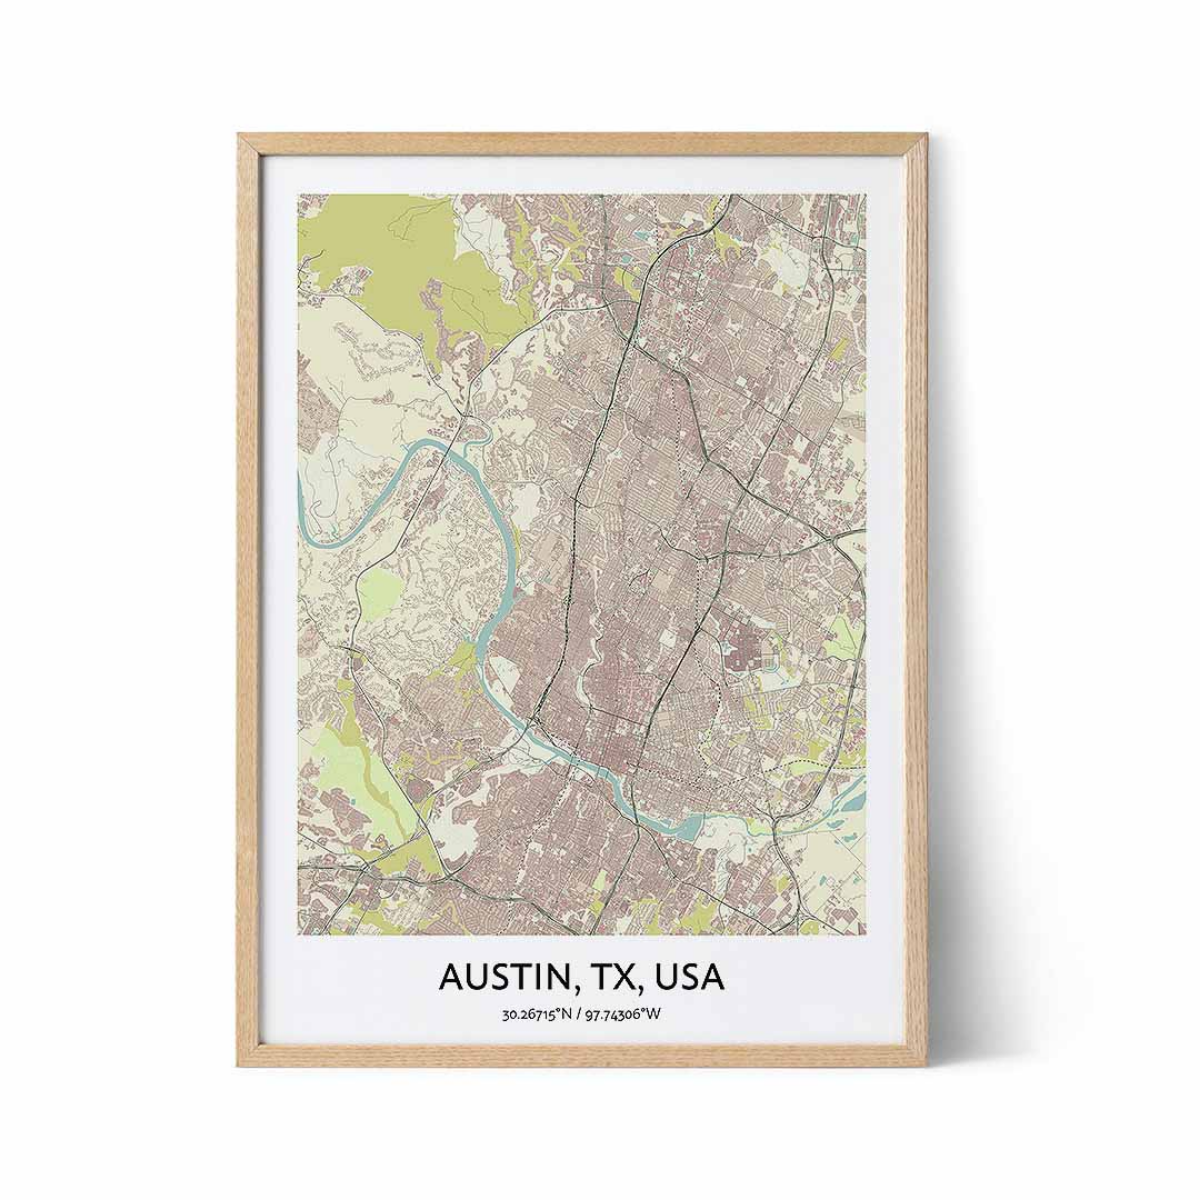 7. Capture Your Love Story with Unique Custom Map Art: Perfect Anniversary Gift for Him